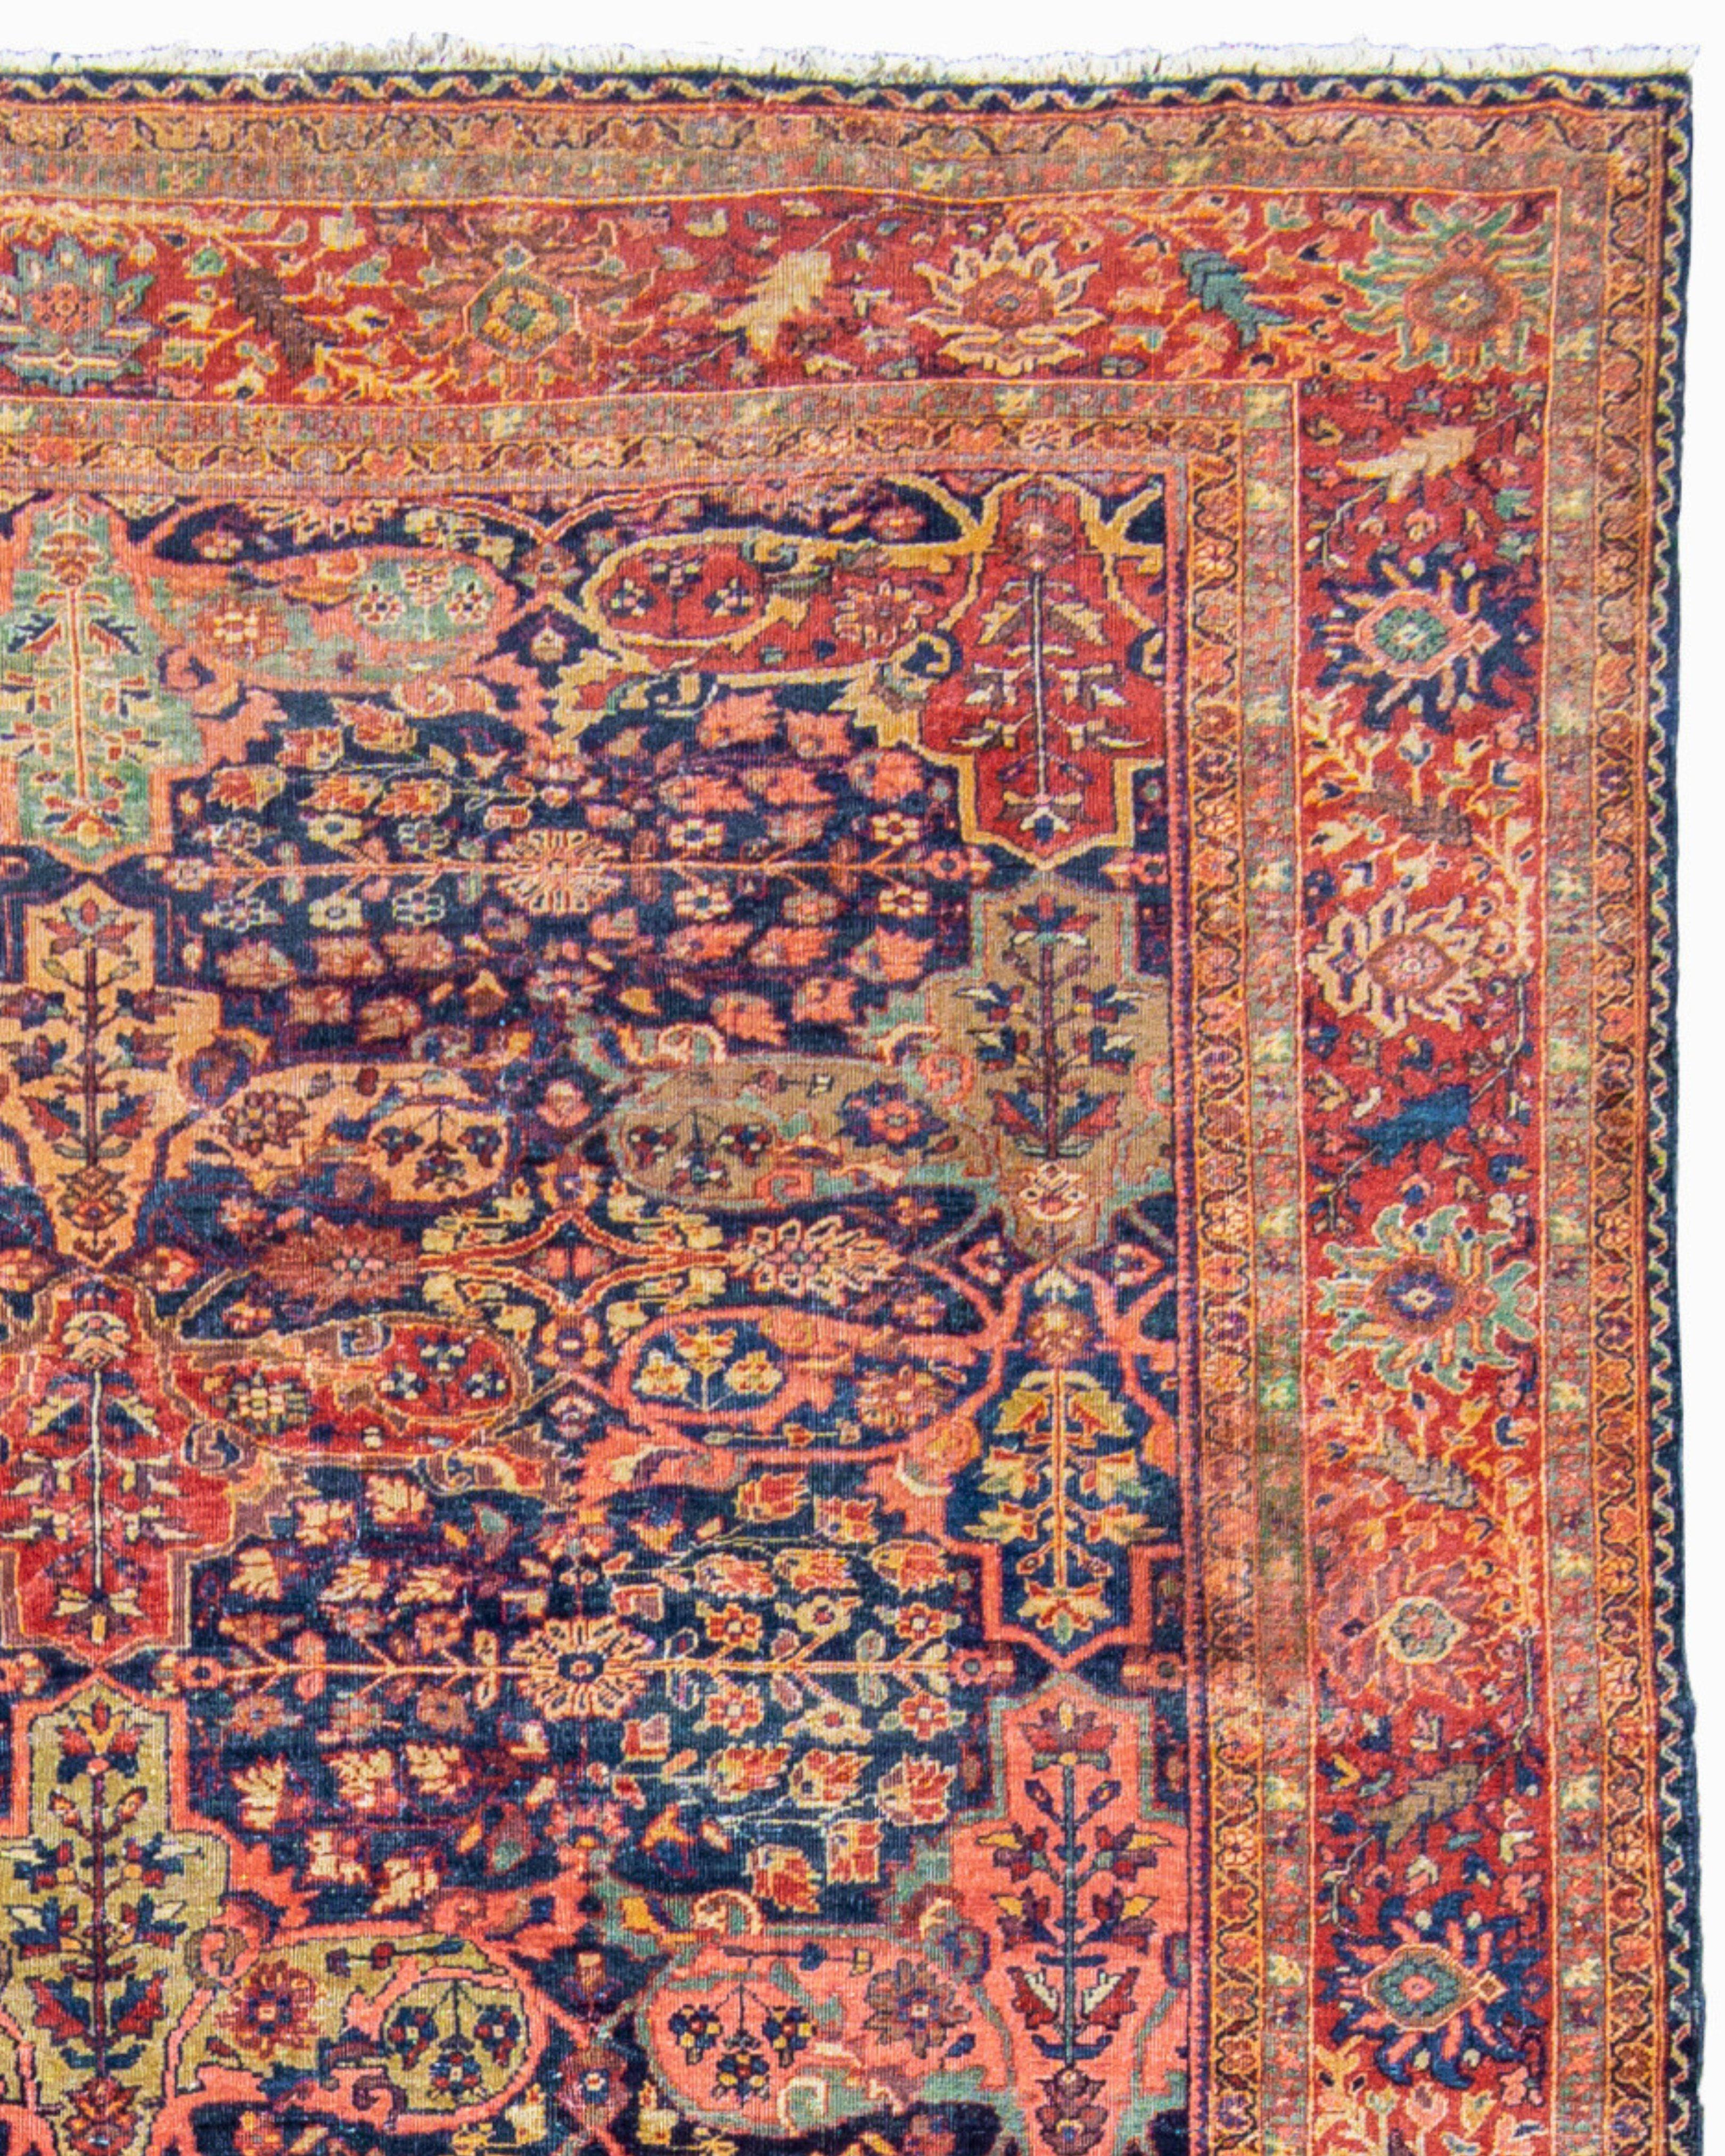 Antique Persian Fereghan Carpet, c. 1900

Additional Information:
Dimensions: 9'3